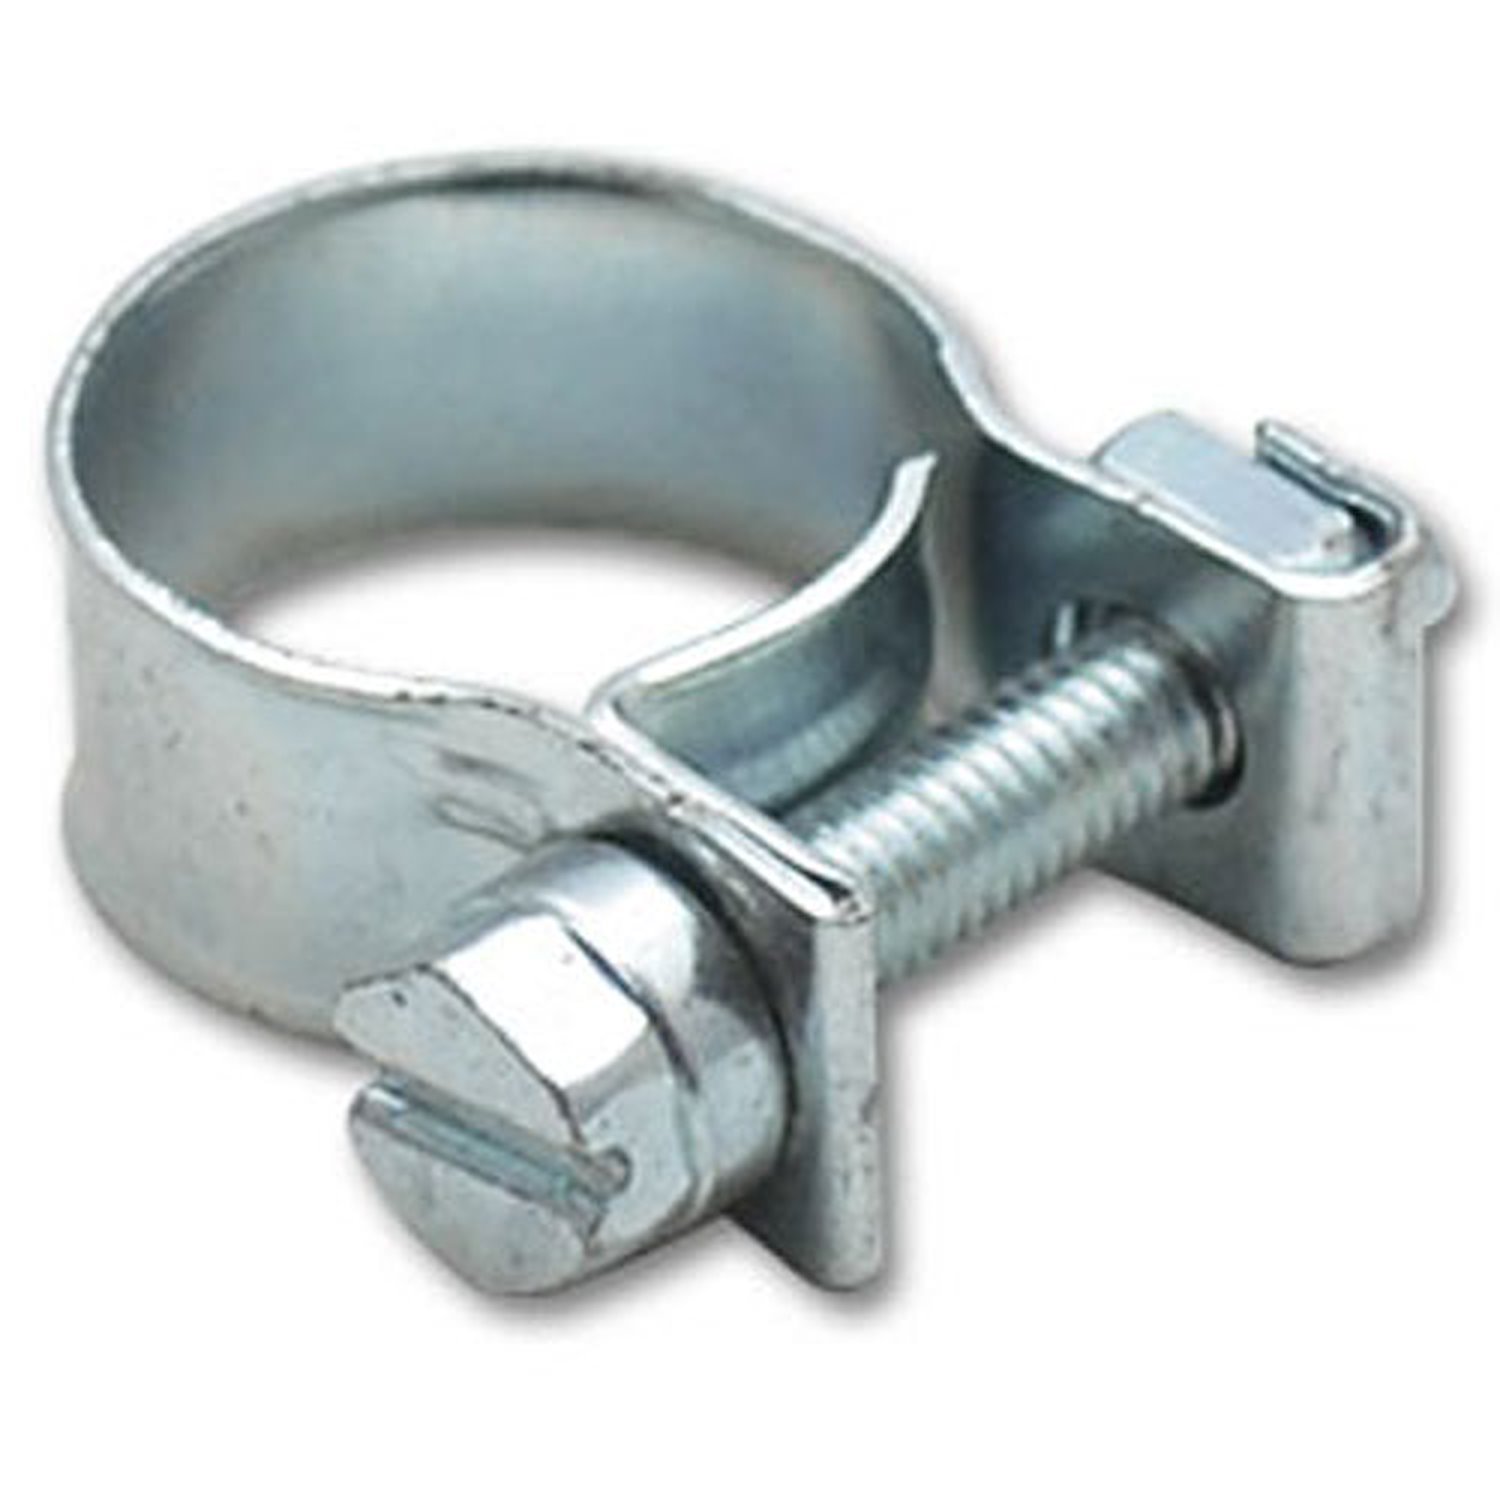 Fuel Injector Style Mini Hose Clamps 15mm - 17mm